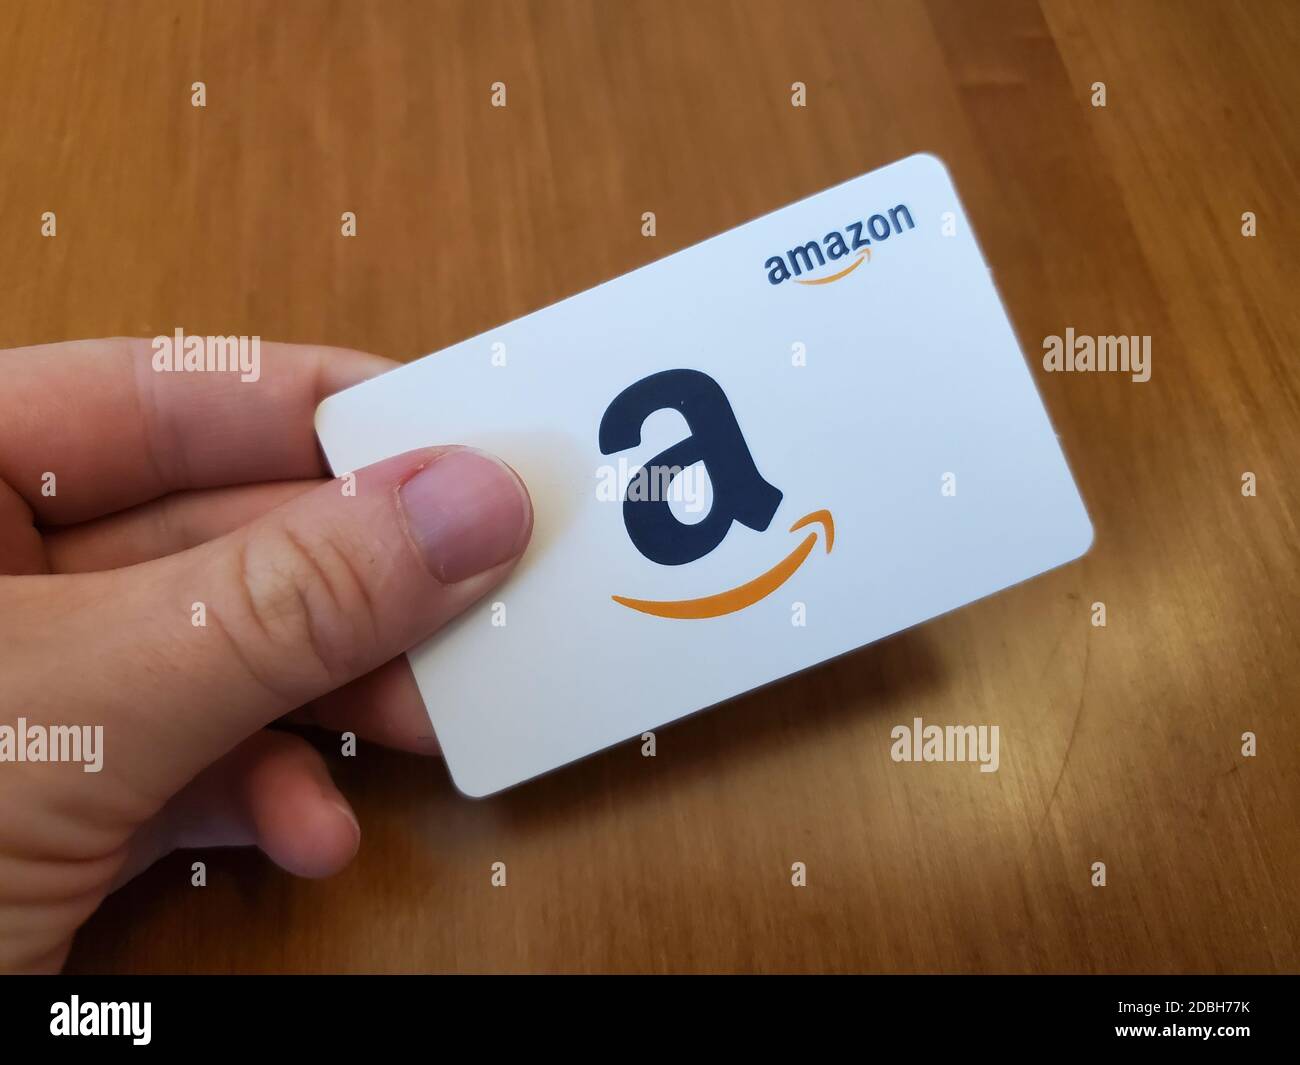 Person holding a white Amazon gift card featuring the